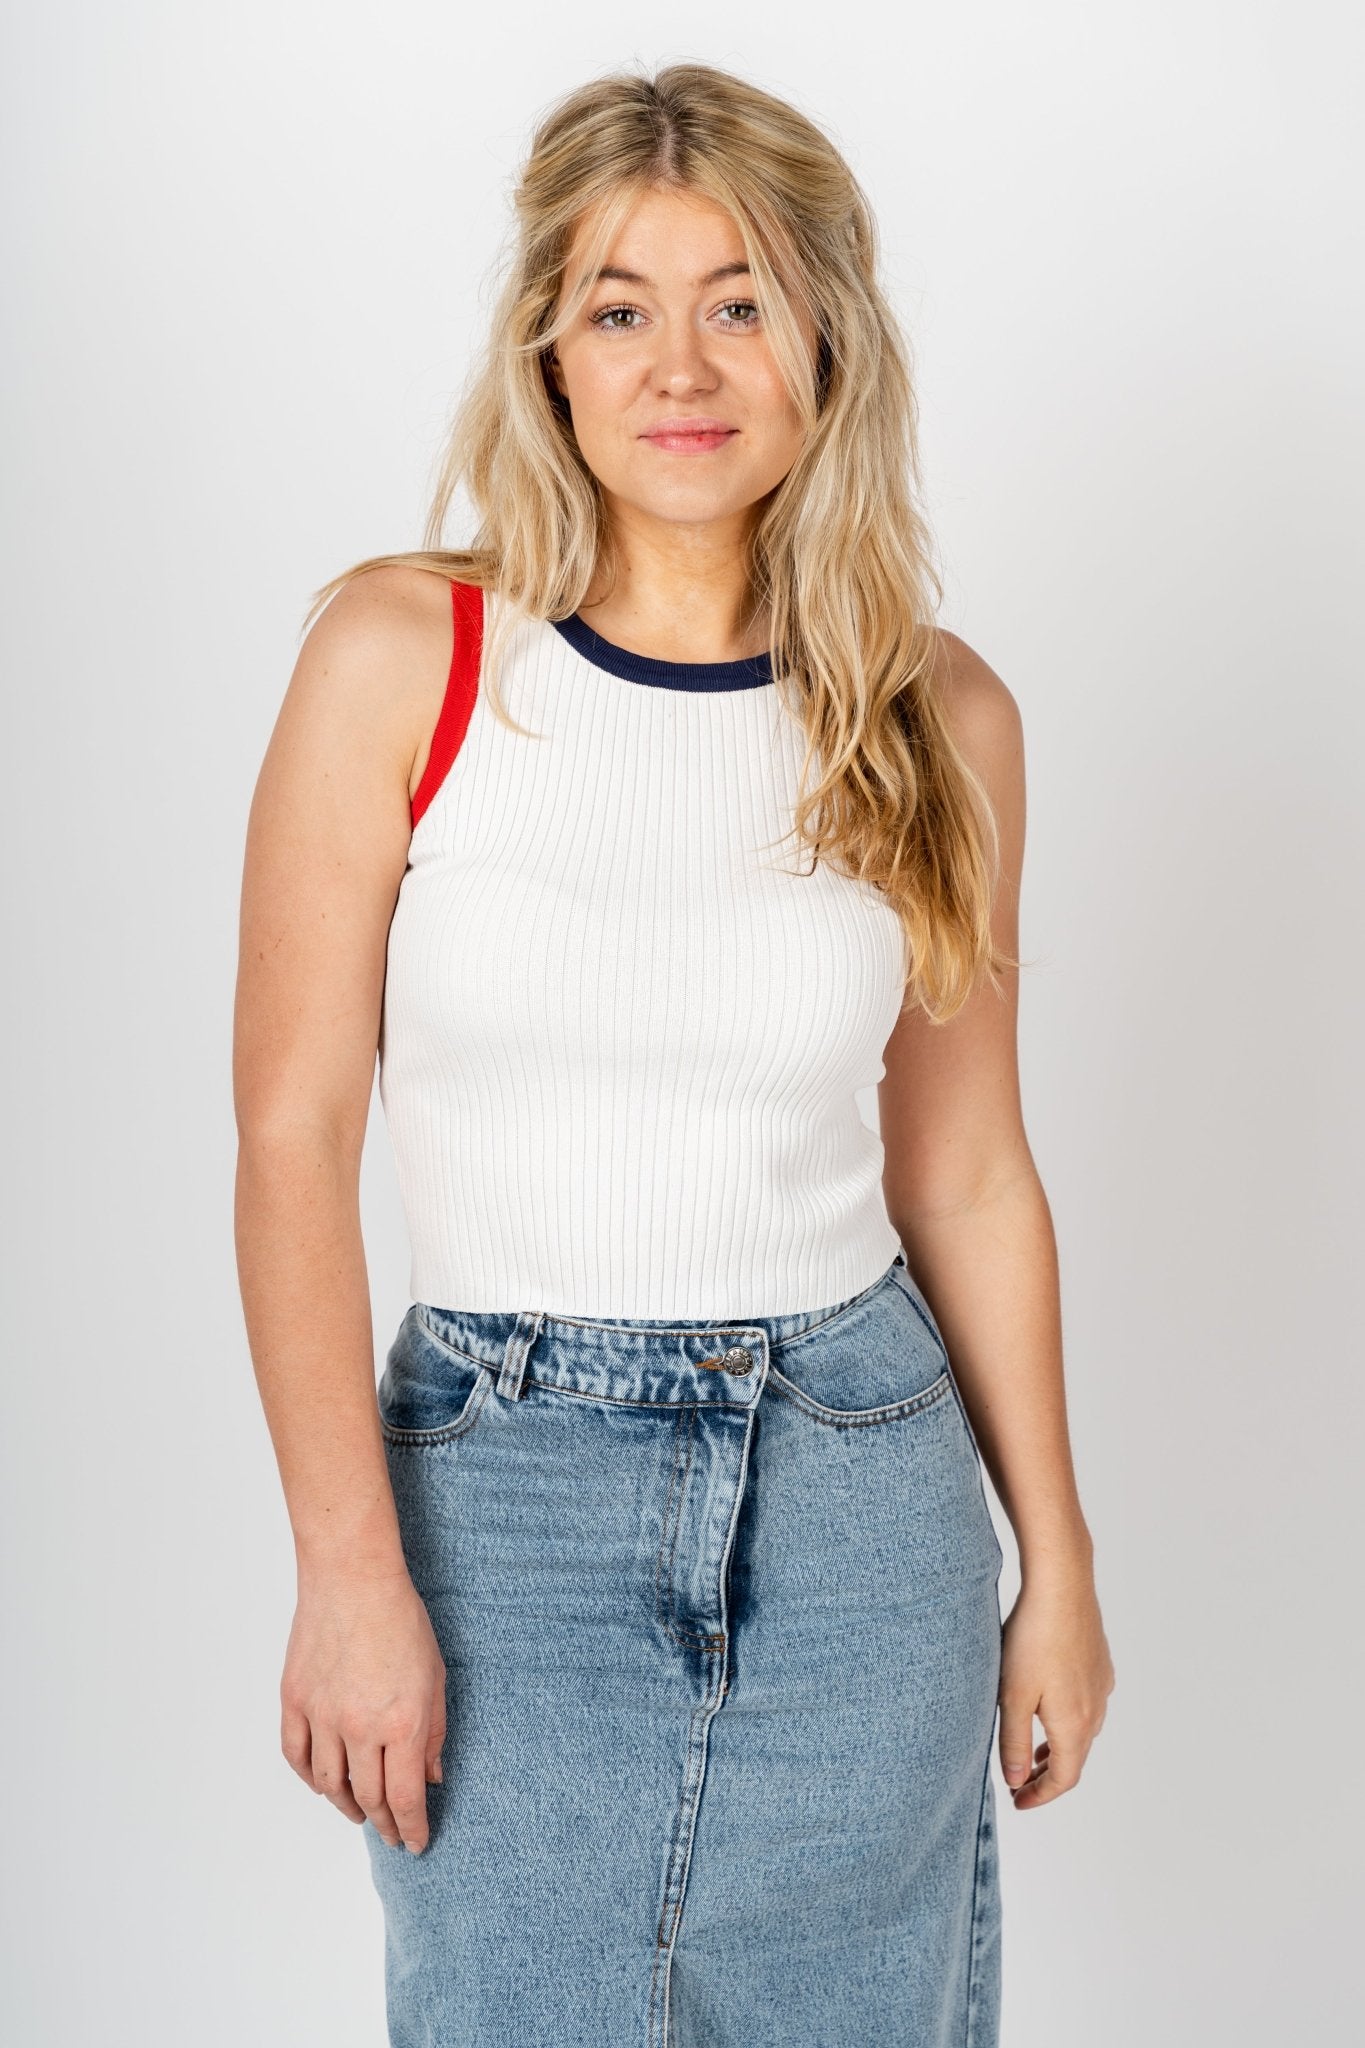 Knit crop top white - Trendy Top - Cute American Summer Collection at Lush Fashion Lounge Boutique in Oklahoma City